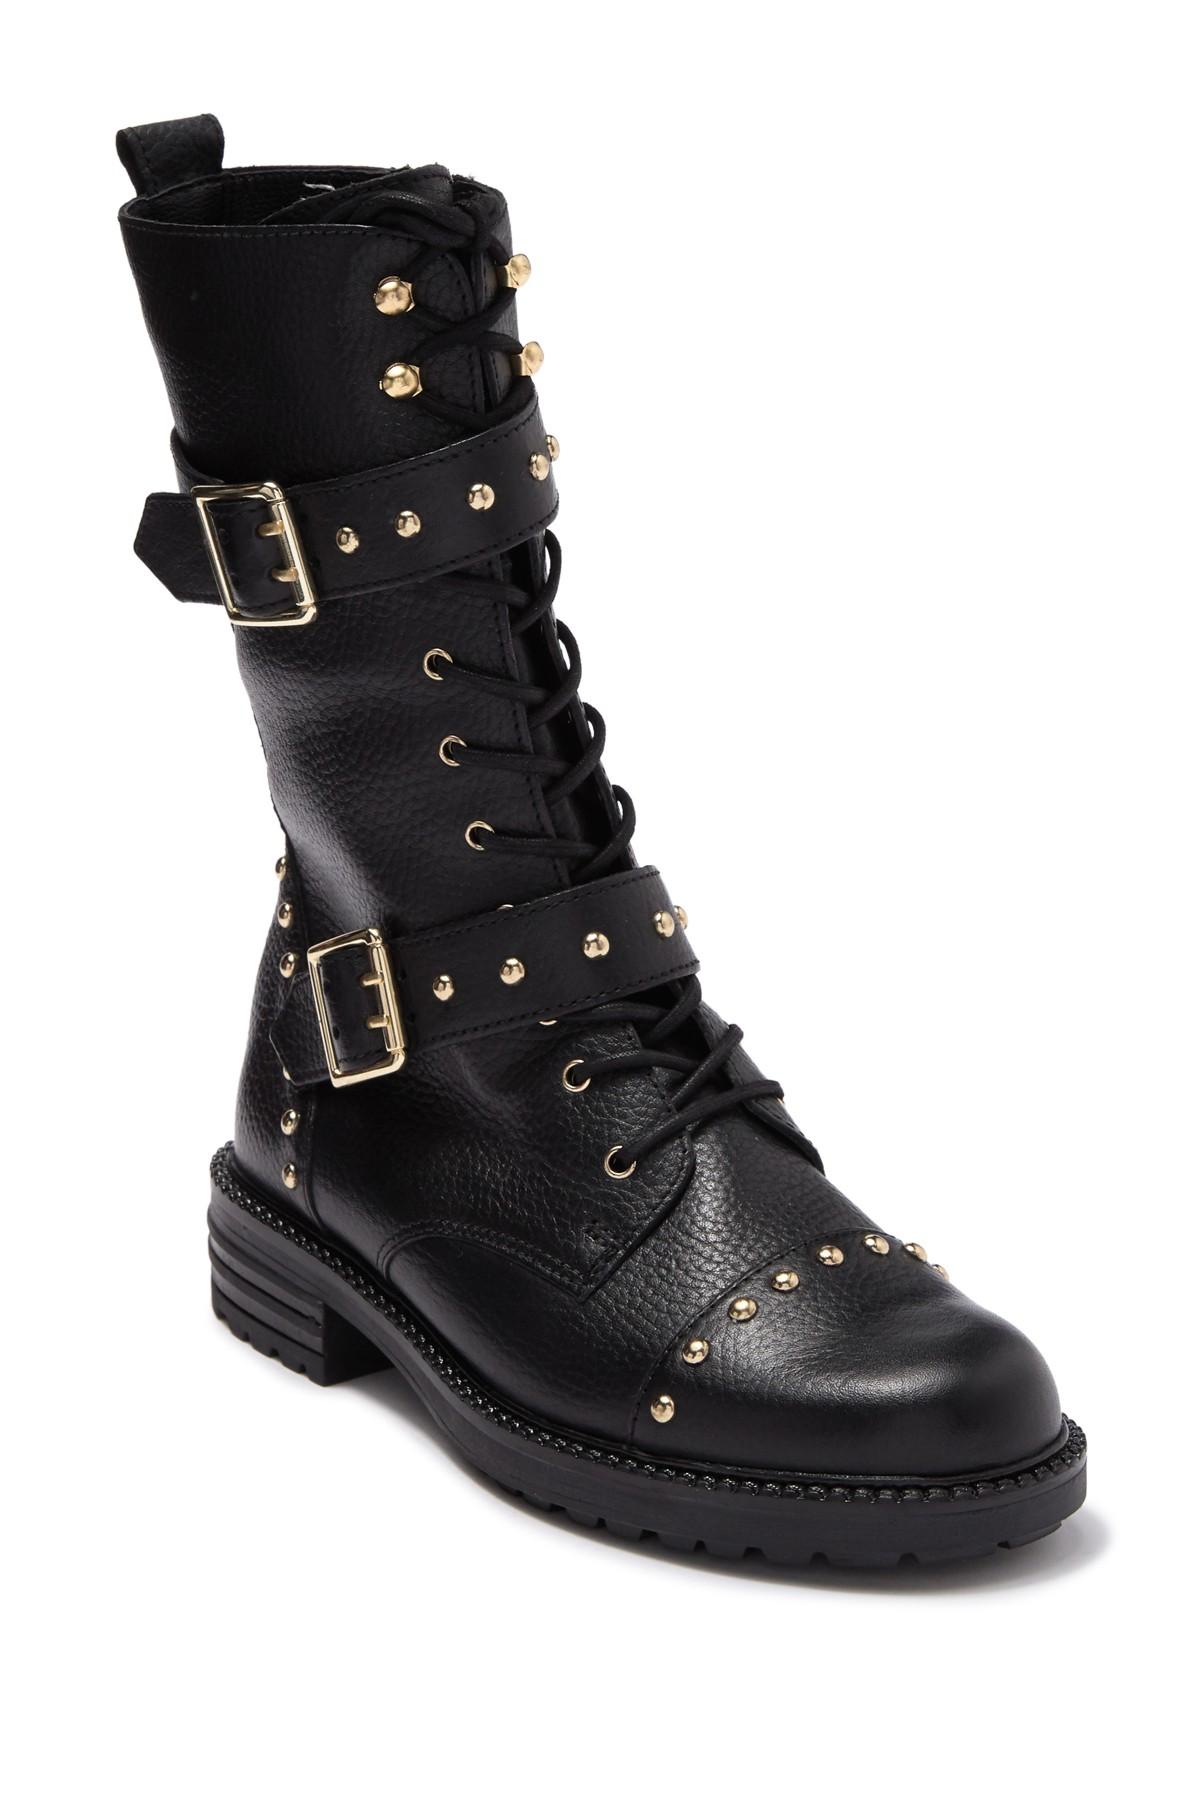 KG by Kurt Geiger Sting Leather Studded Lace Up Boot in Charcoal (Black ...